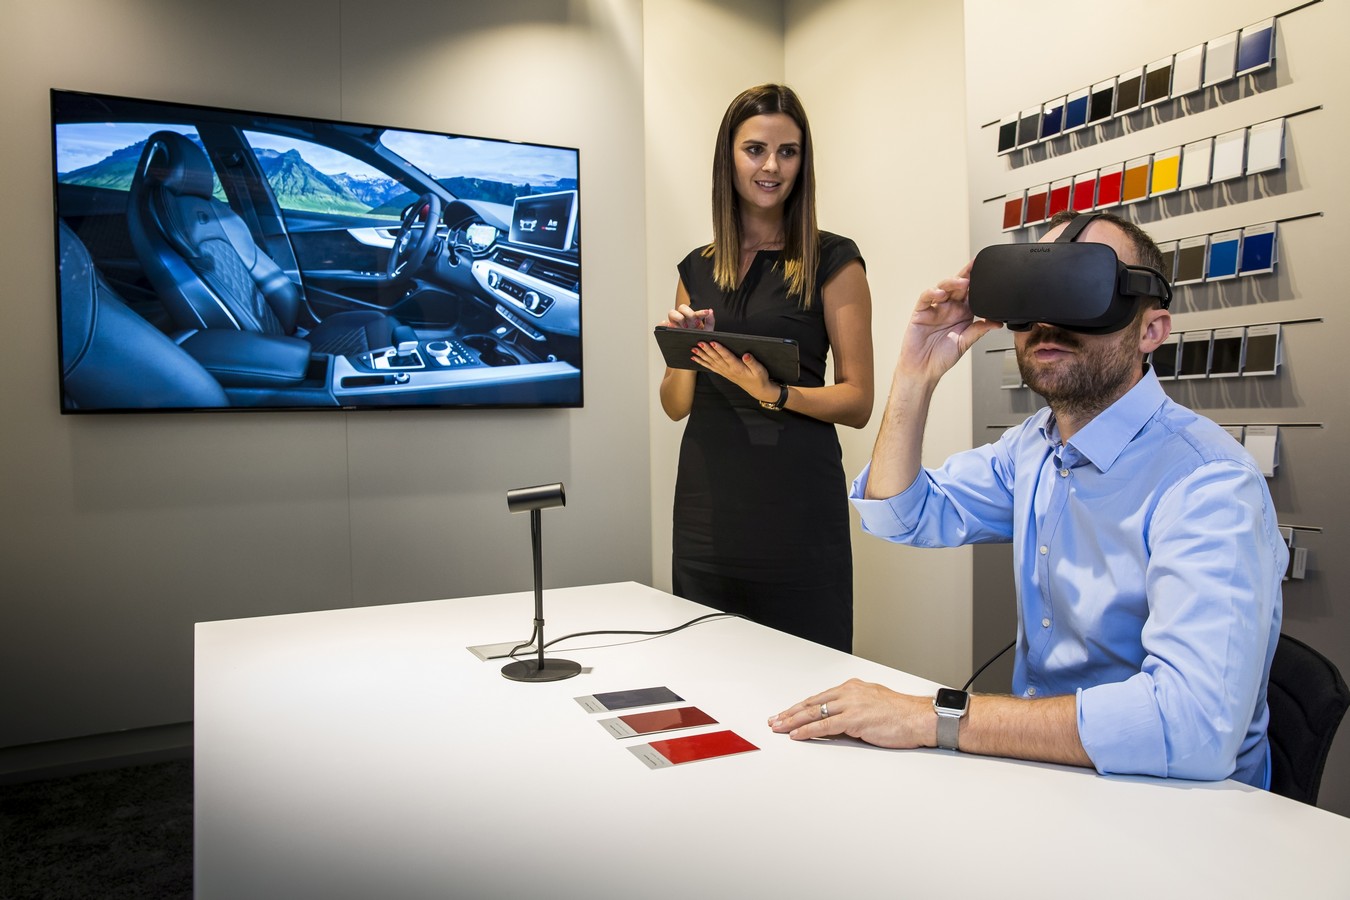 A premiere in automotive retail: the Audi VR experience is being launched as first fully functional virtual reality application for customer consultation at dealerships. First Audi dealers in Germany, the United Kingdom and Spain are now starting to deploy the virtual reality headset installation, with additional markets and locations to follow. With the VR solution, customers can get an extremely realistic experience of their individually configured car, down to the last detail. The VR experience explains Audi technologies intuitively and offers customers the opportunity to immerse themselves virtually in extraordinary moments from the world of the four rings. As part of Audi’s comprehensive initiative for digital innovation at dealerships, the VR experience is completely integrated into the brand’s IT systems.